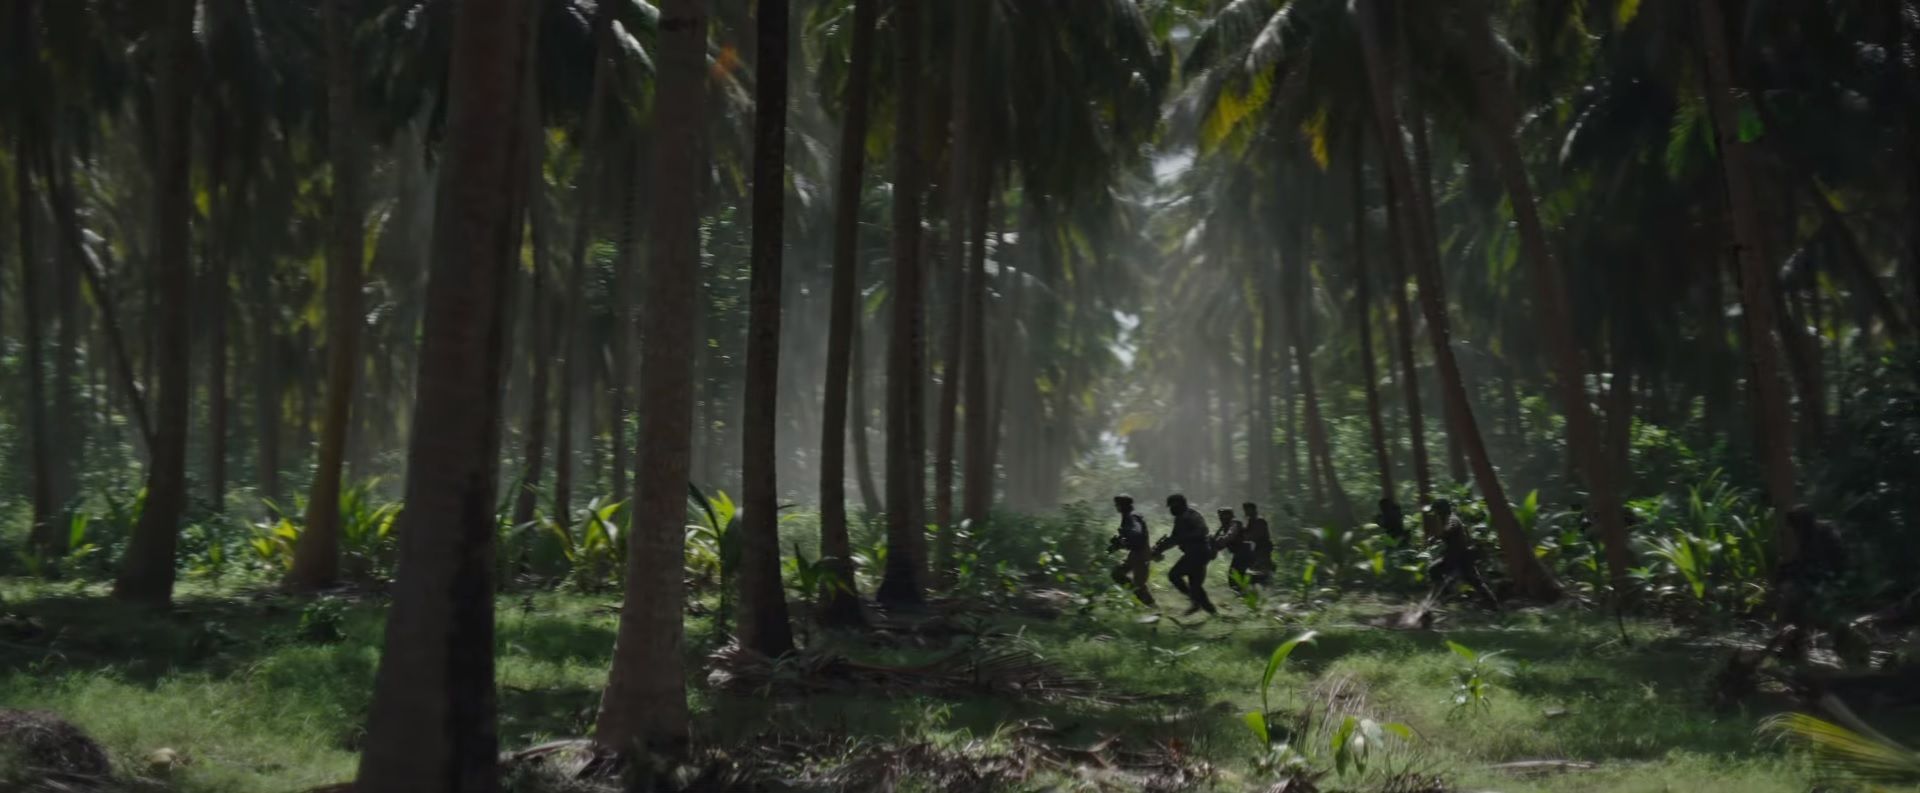 Rogue One A Star Wars Story Trailer 3 - Rebel soldiers on Scarif